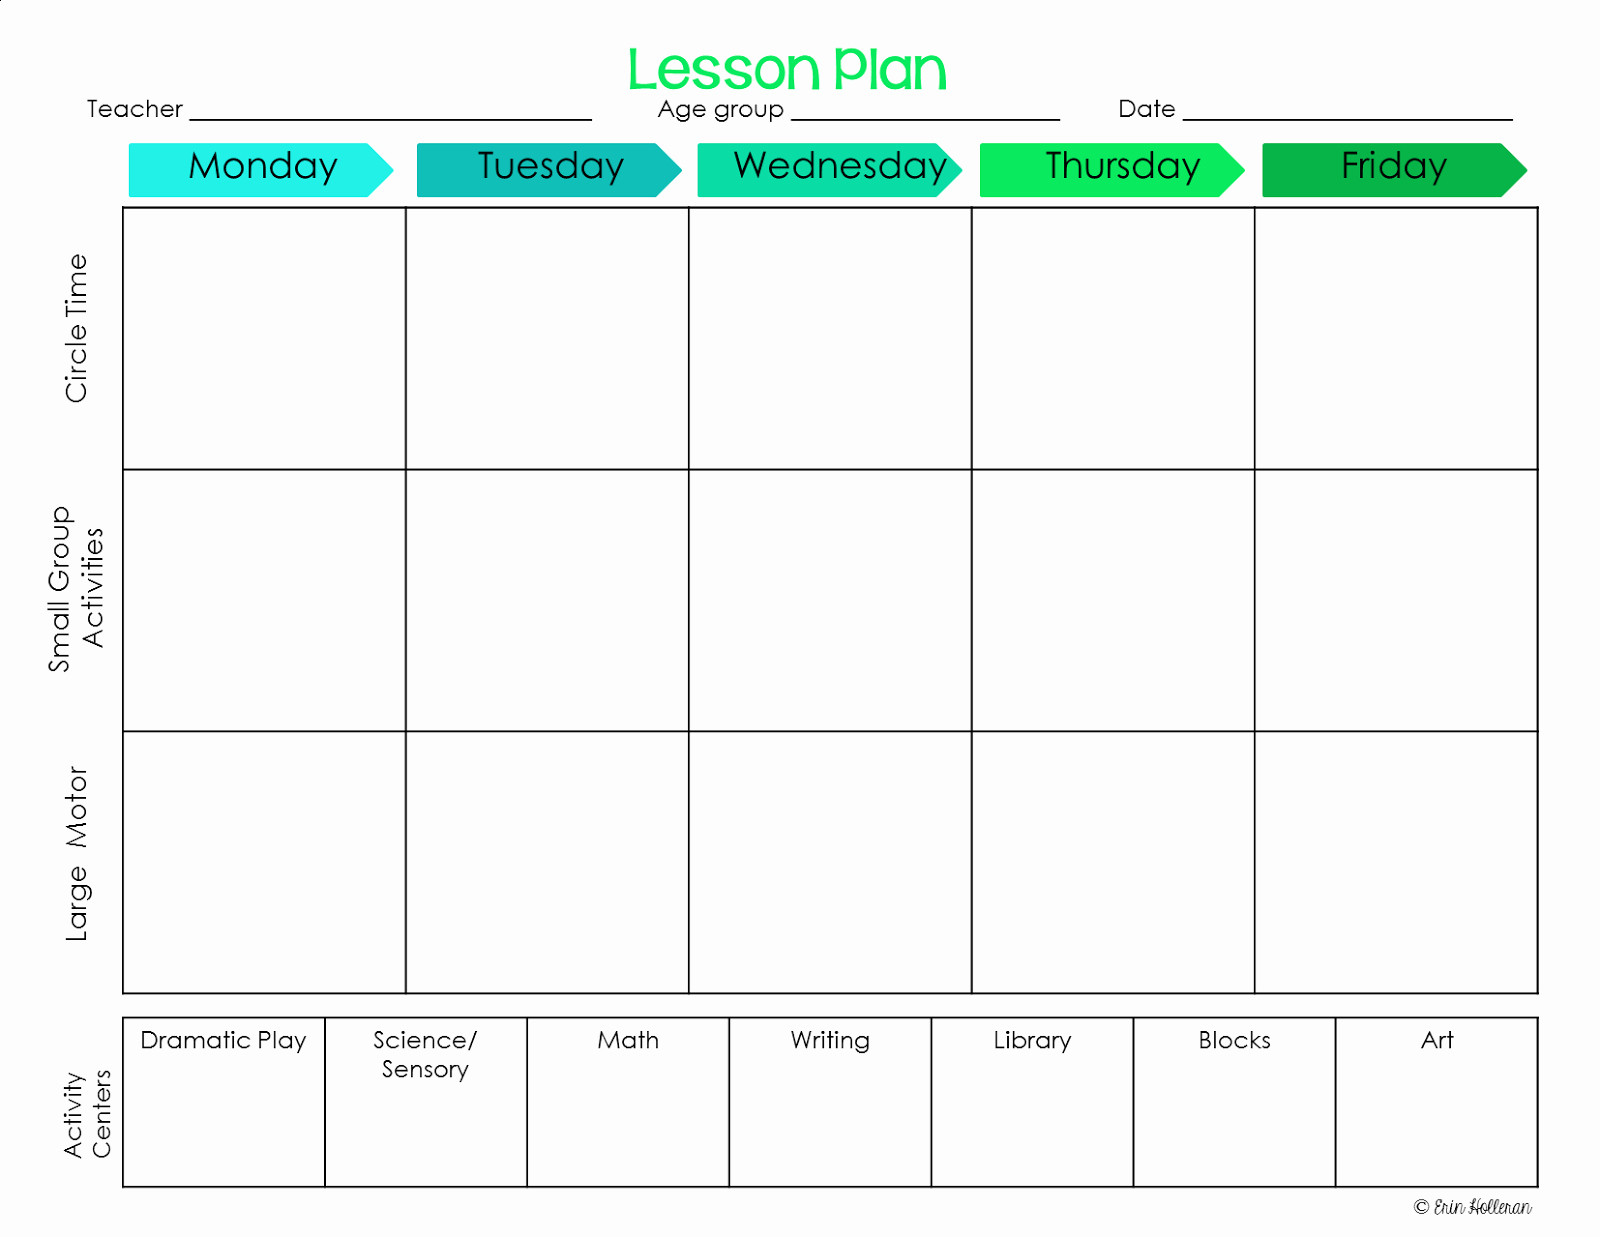 Weekly Lesson Plan Template 005 Preschool Weekly Lesson Plan Template Free Ideas with